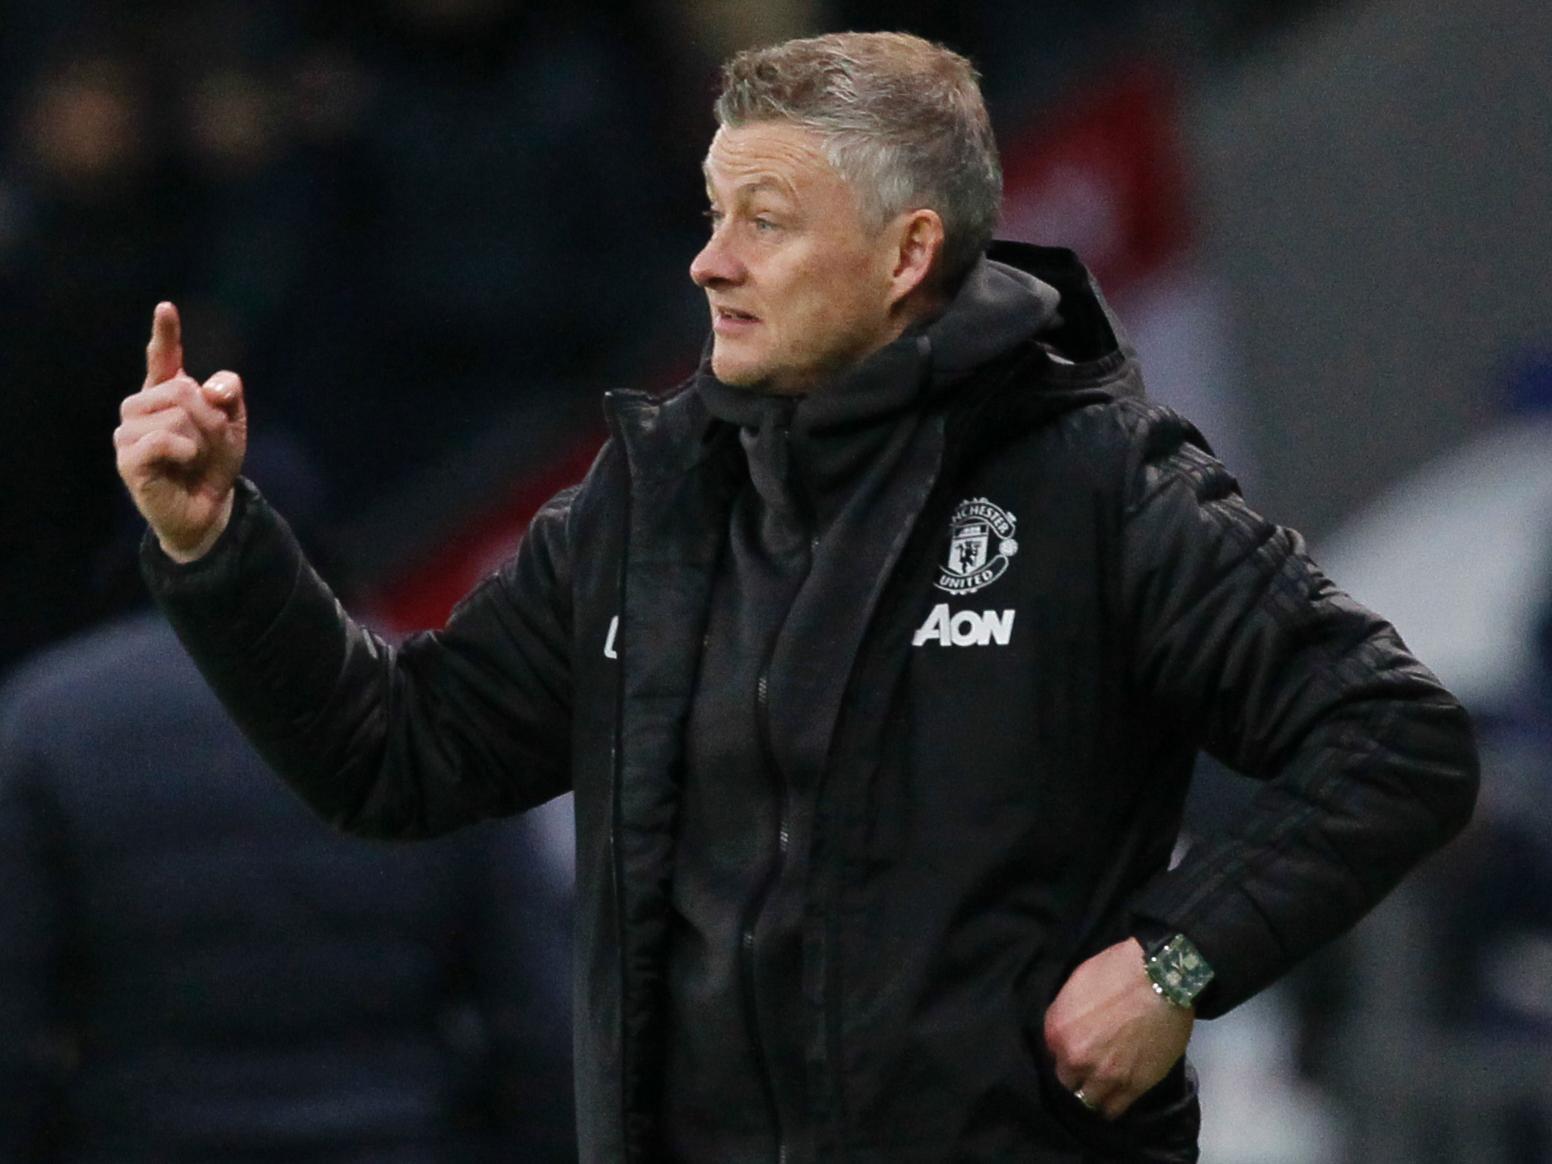 Ninth-placed Manchester United welcome 15th-placed Aston Villa on Sunday. A win for Ole Gunnar Solskjaers side could see them move up to 5th.